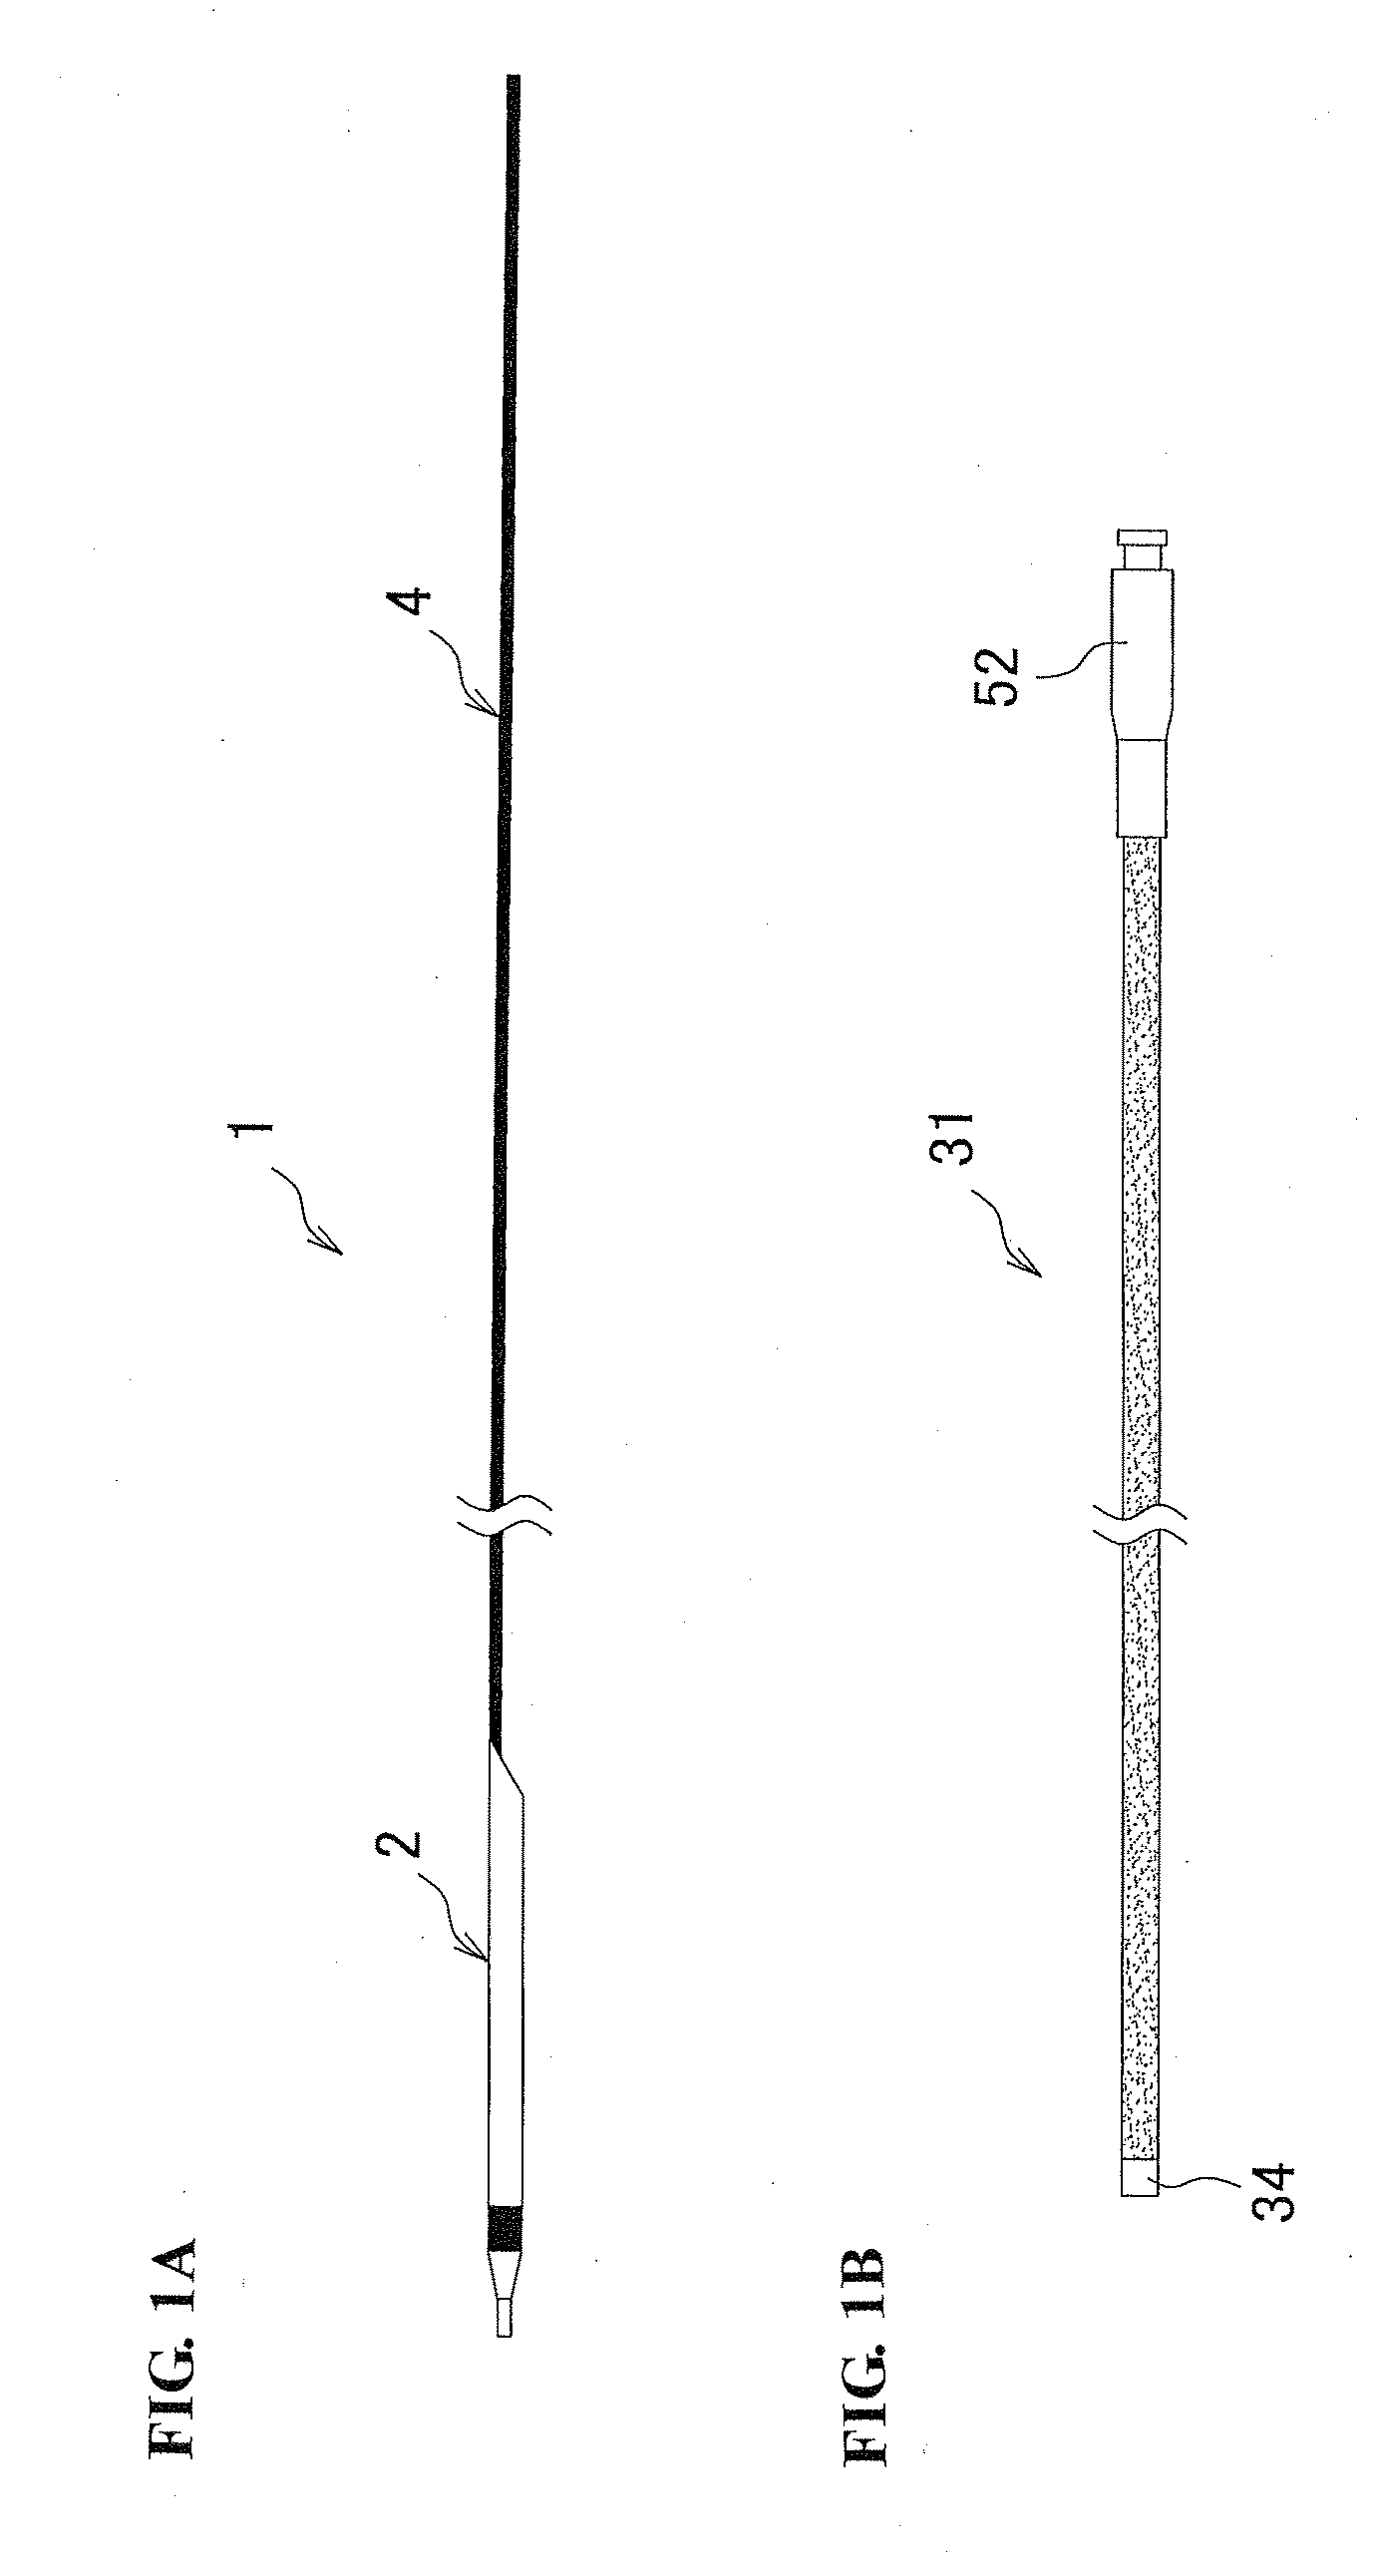 Insertion assisting tool for catheter, catheter assembly, and catheter set